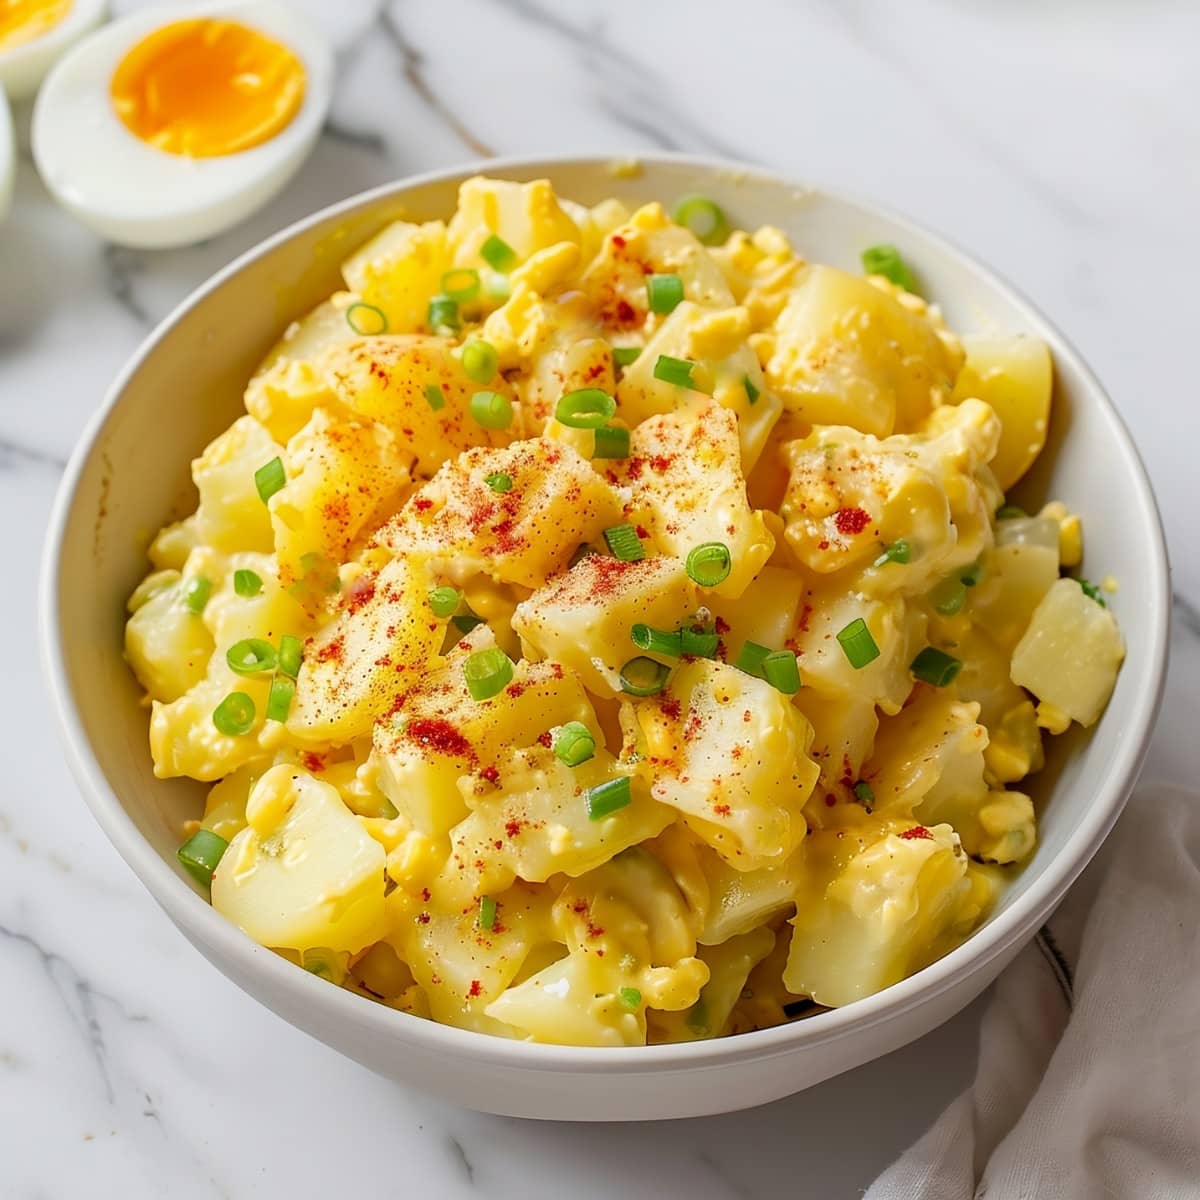 Creamy potato salad with a Southern twist, showcasing mayo-based dressing and pickle relish